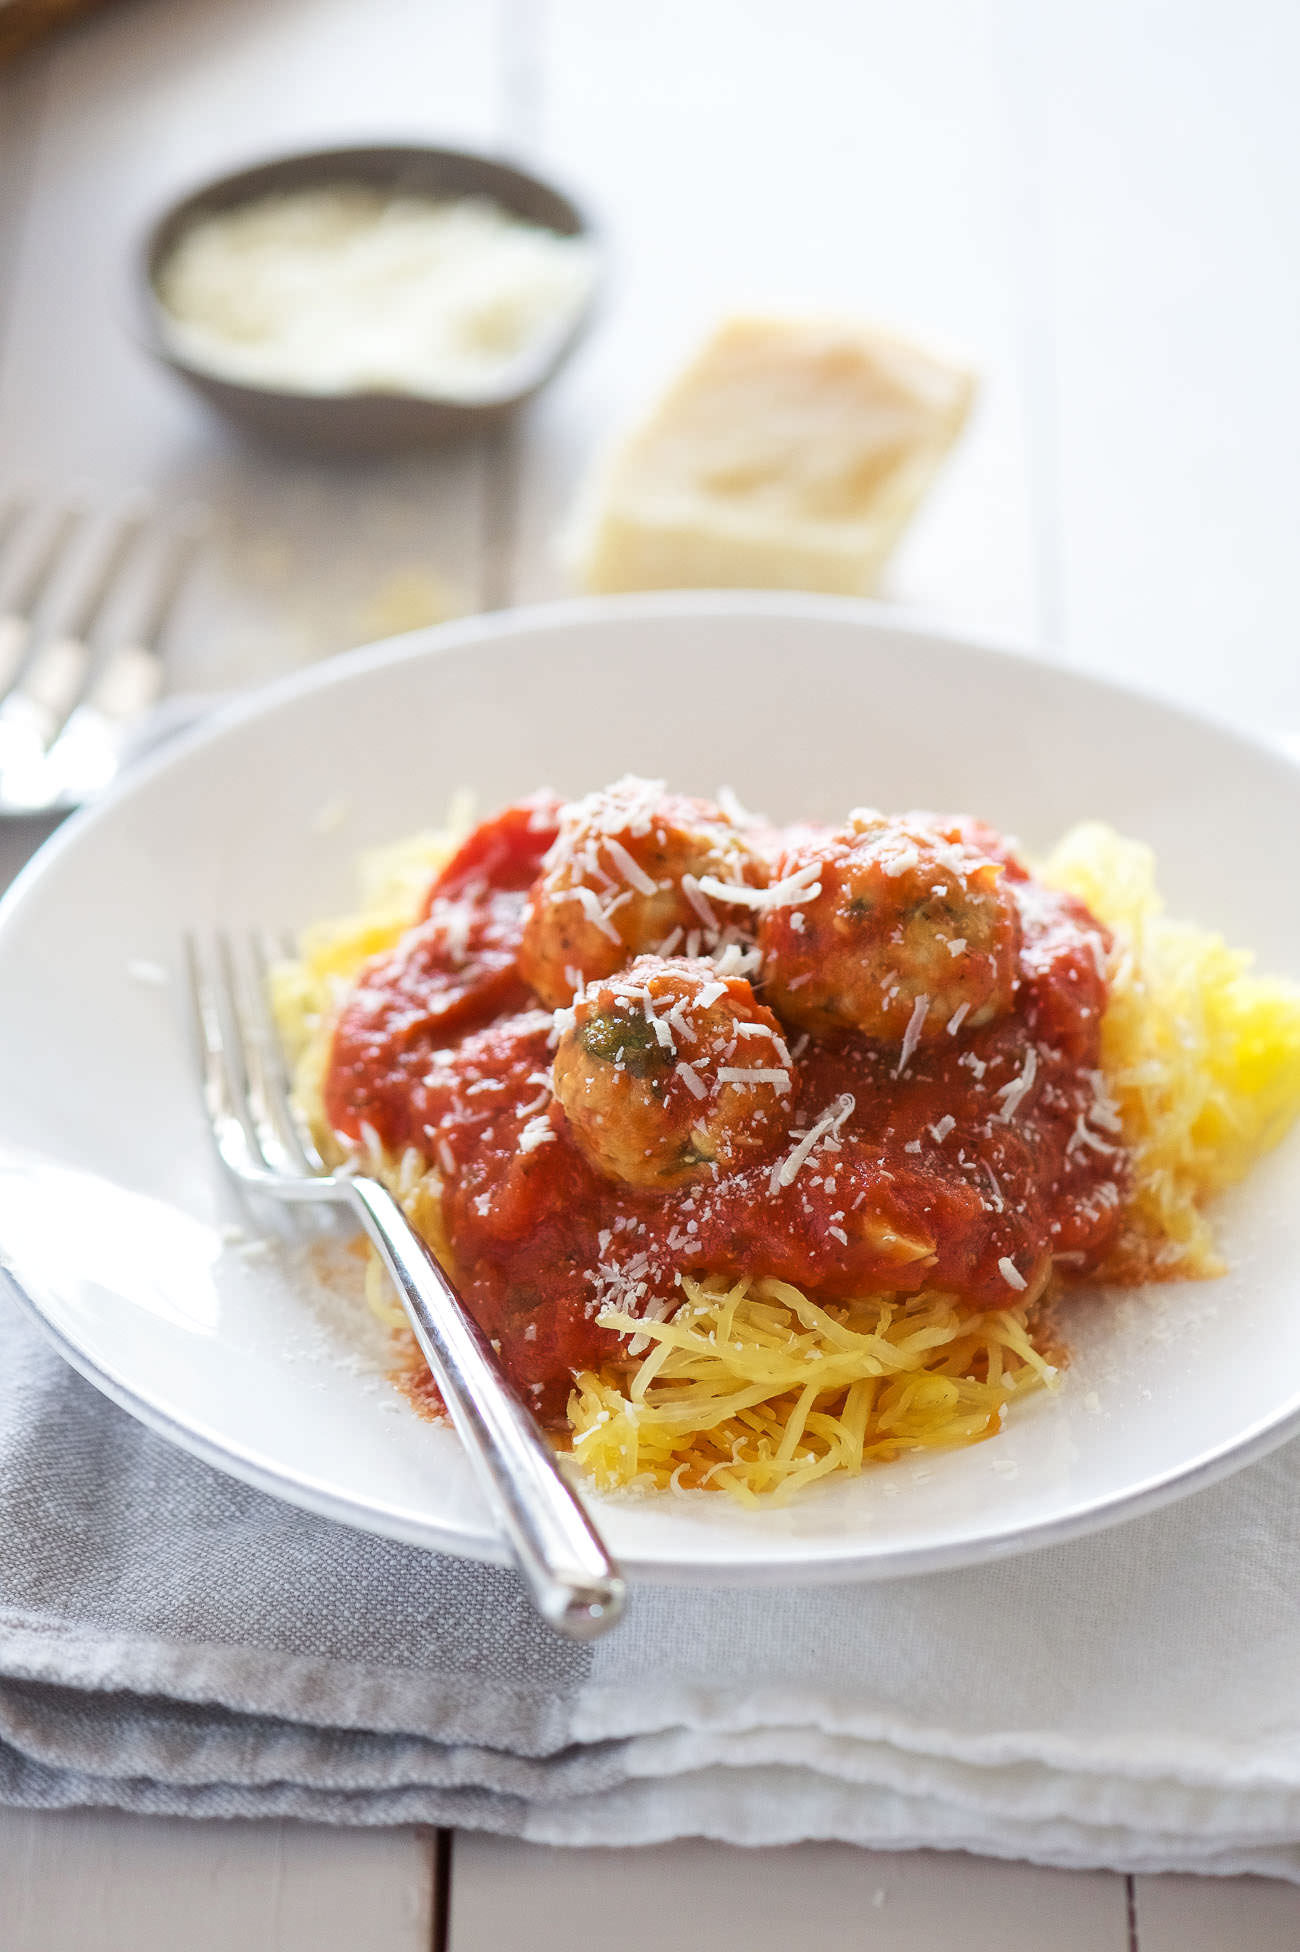 Skinny Sun Dried Tomato Meatballs with Spaghetti Squash are a light and flavorful way to cure your craving for spaghetti and meatballs! Lean ground turkey is mixed with sun dried tomatoes and spinach. Perfect to make ahead, freeze then bake before serving!